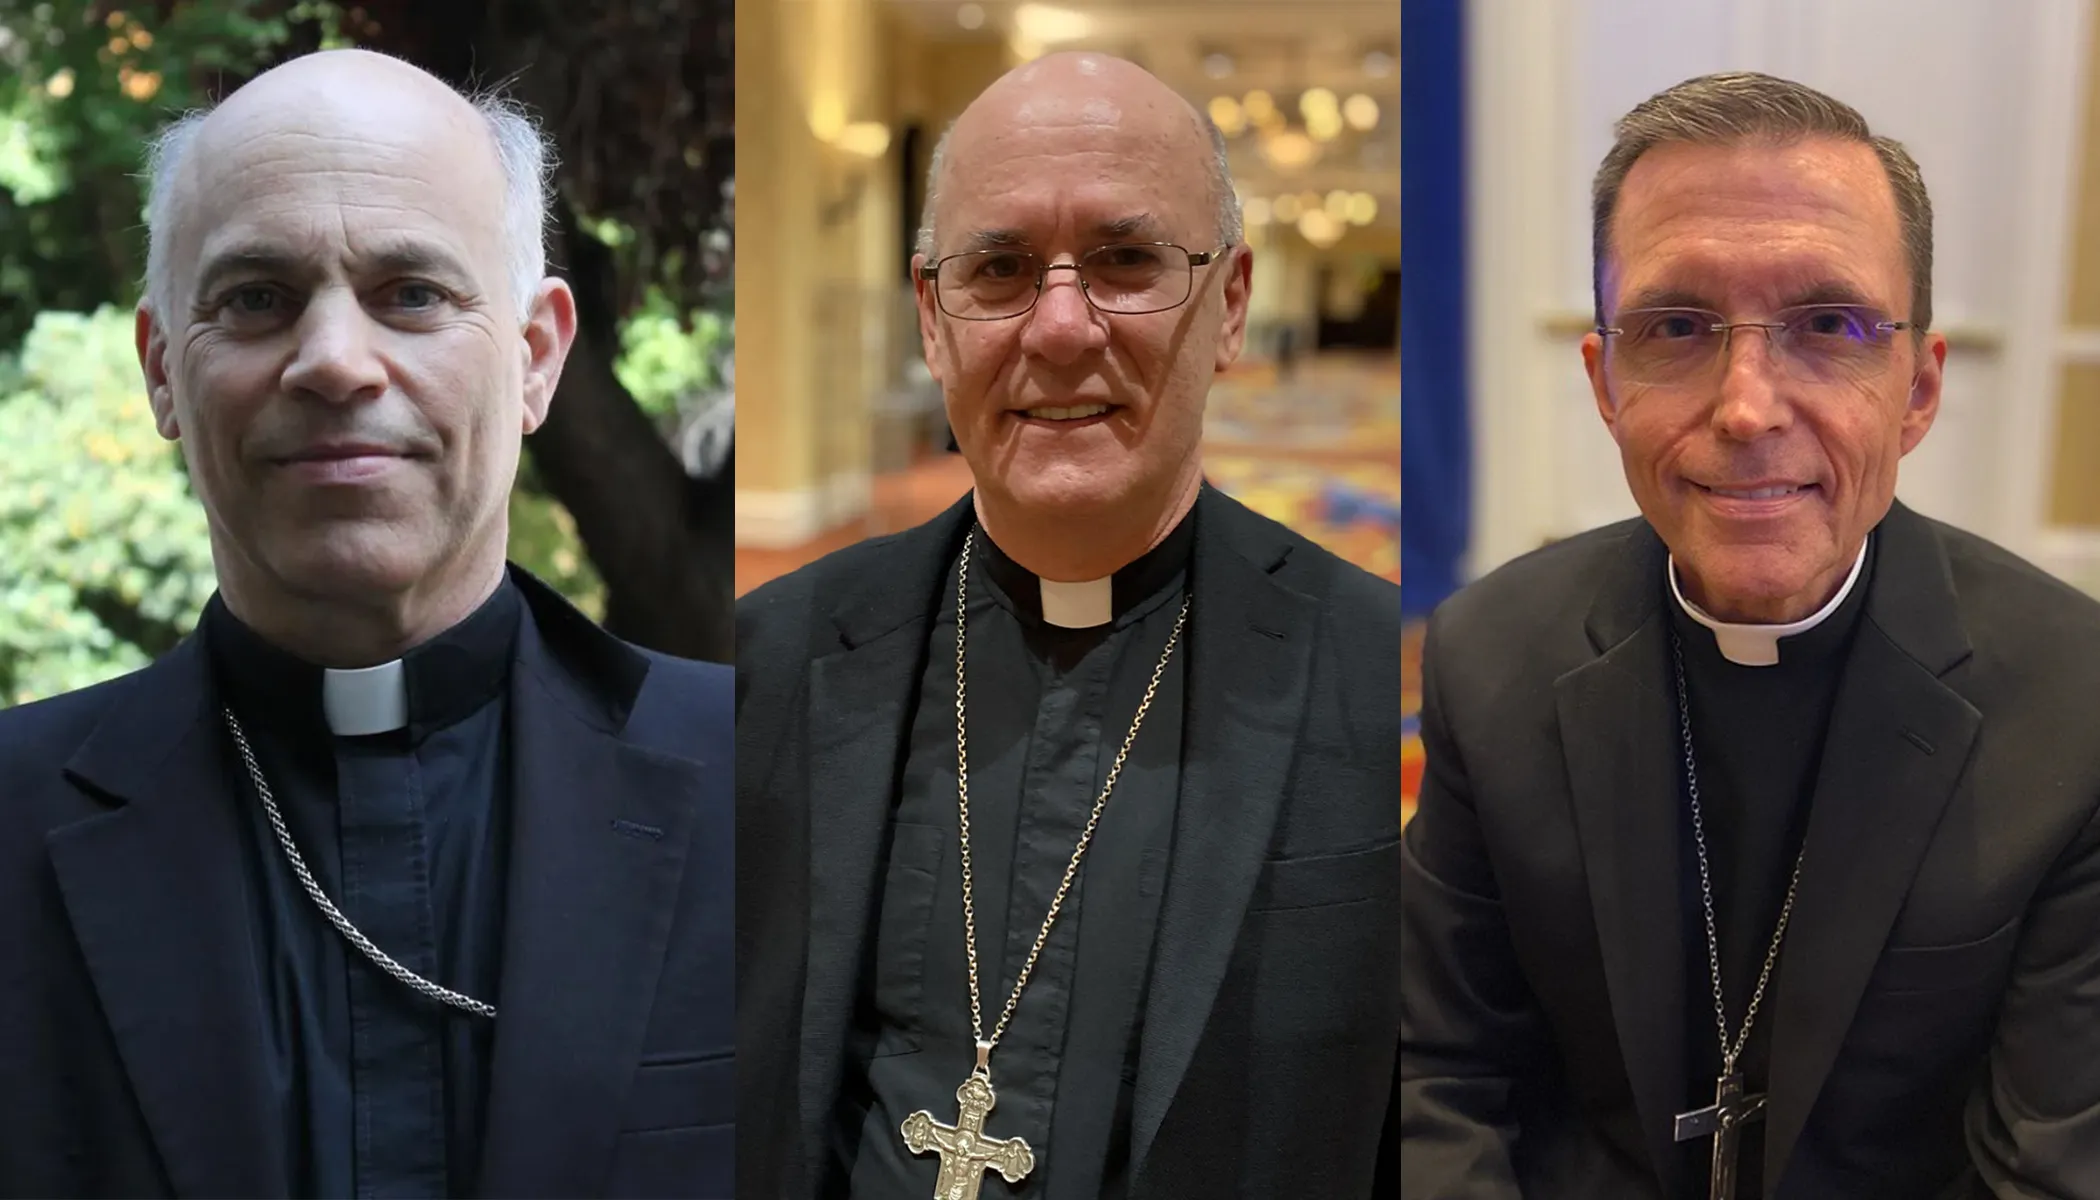 Left to right: Archbishop Salvatore Cordileone of San Francisco, Bishop Kevin C. Rhoades of Fort Worth-South Bend, Indiana, and Auxiliary Bishop Robert P. Reed of the Archdiocese of Boston.?w=200&h=150